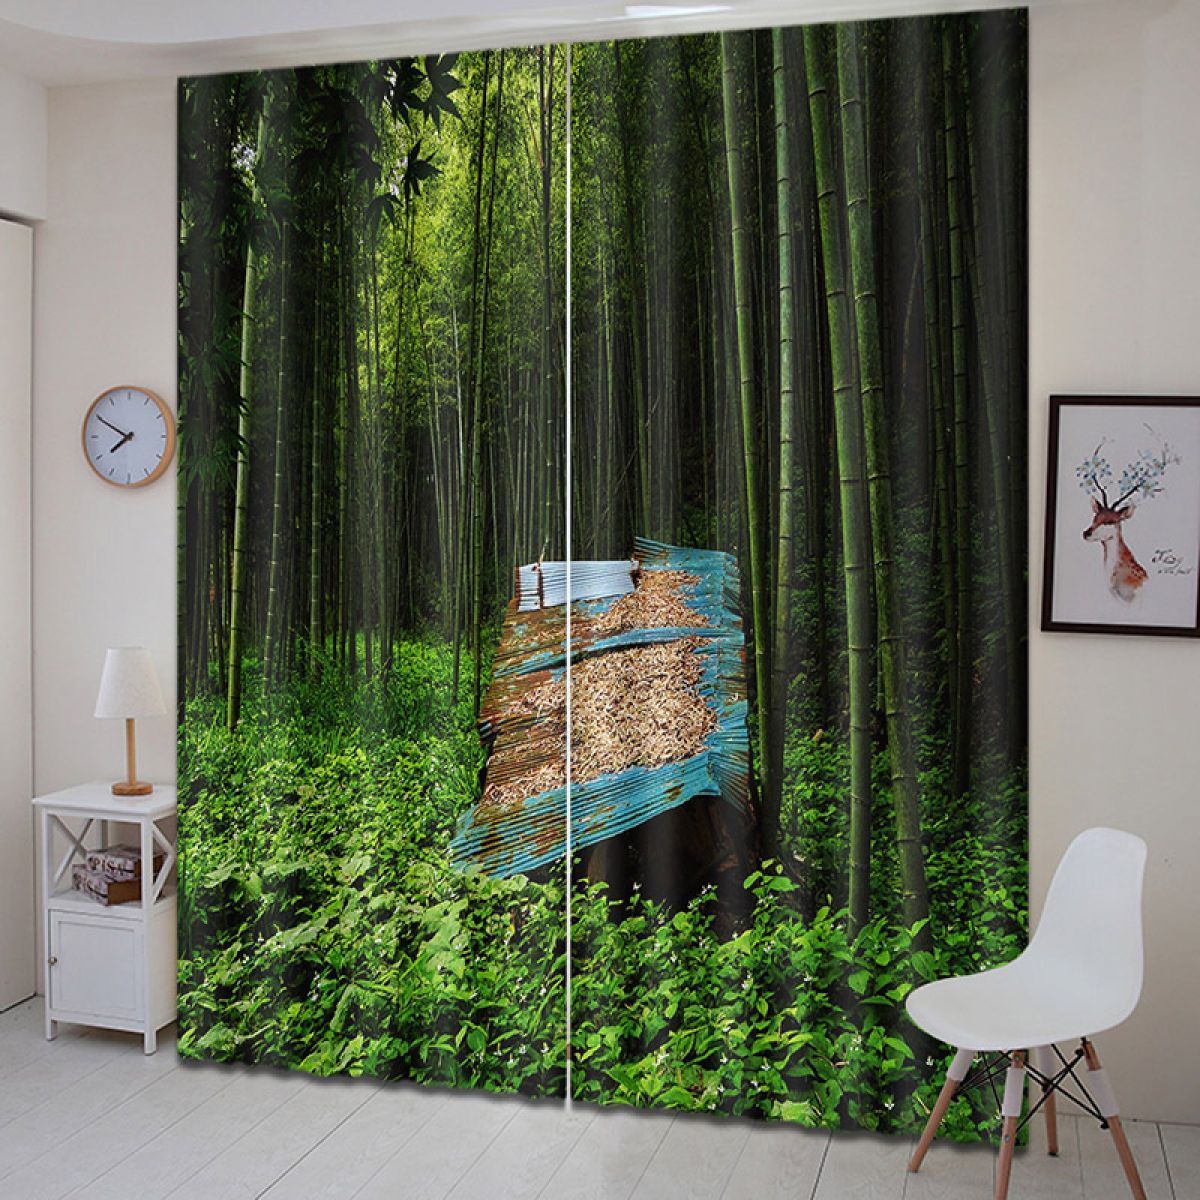 Iron House In The Bamboo Forest Printed Window Curtain Home Decor